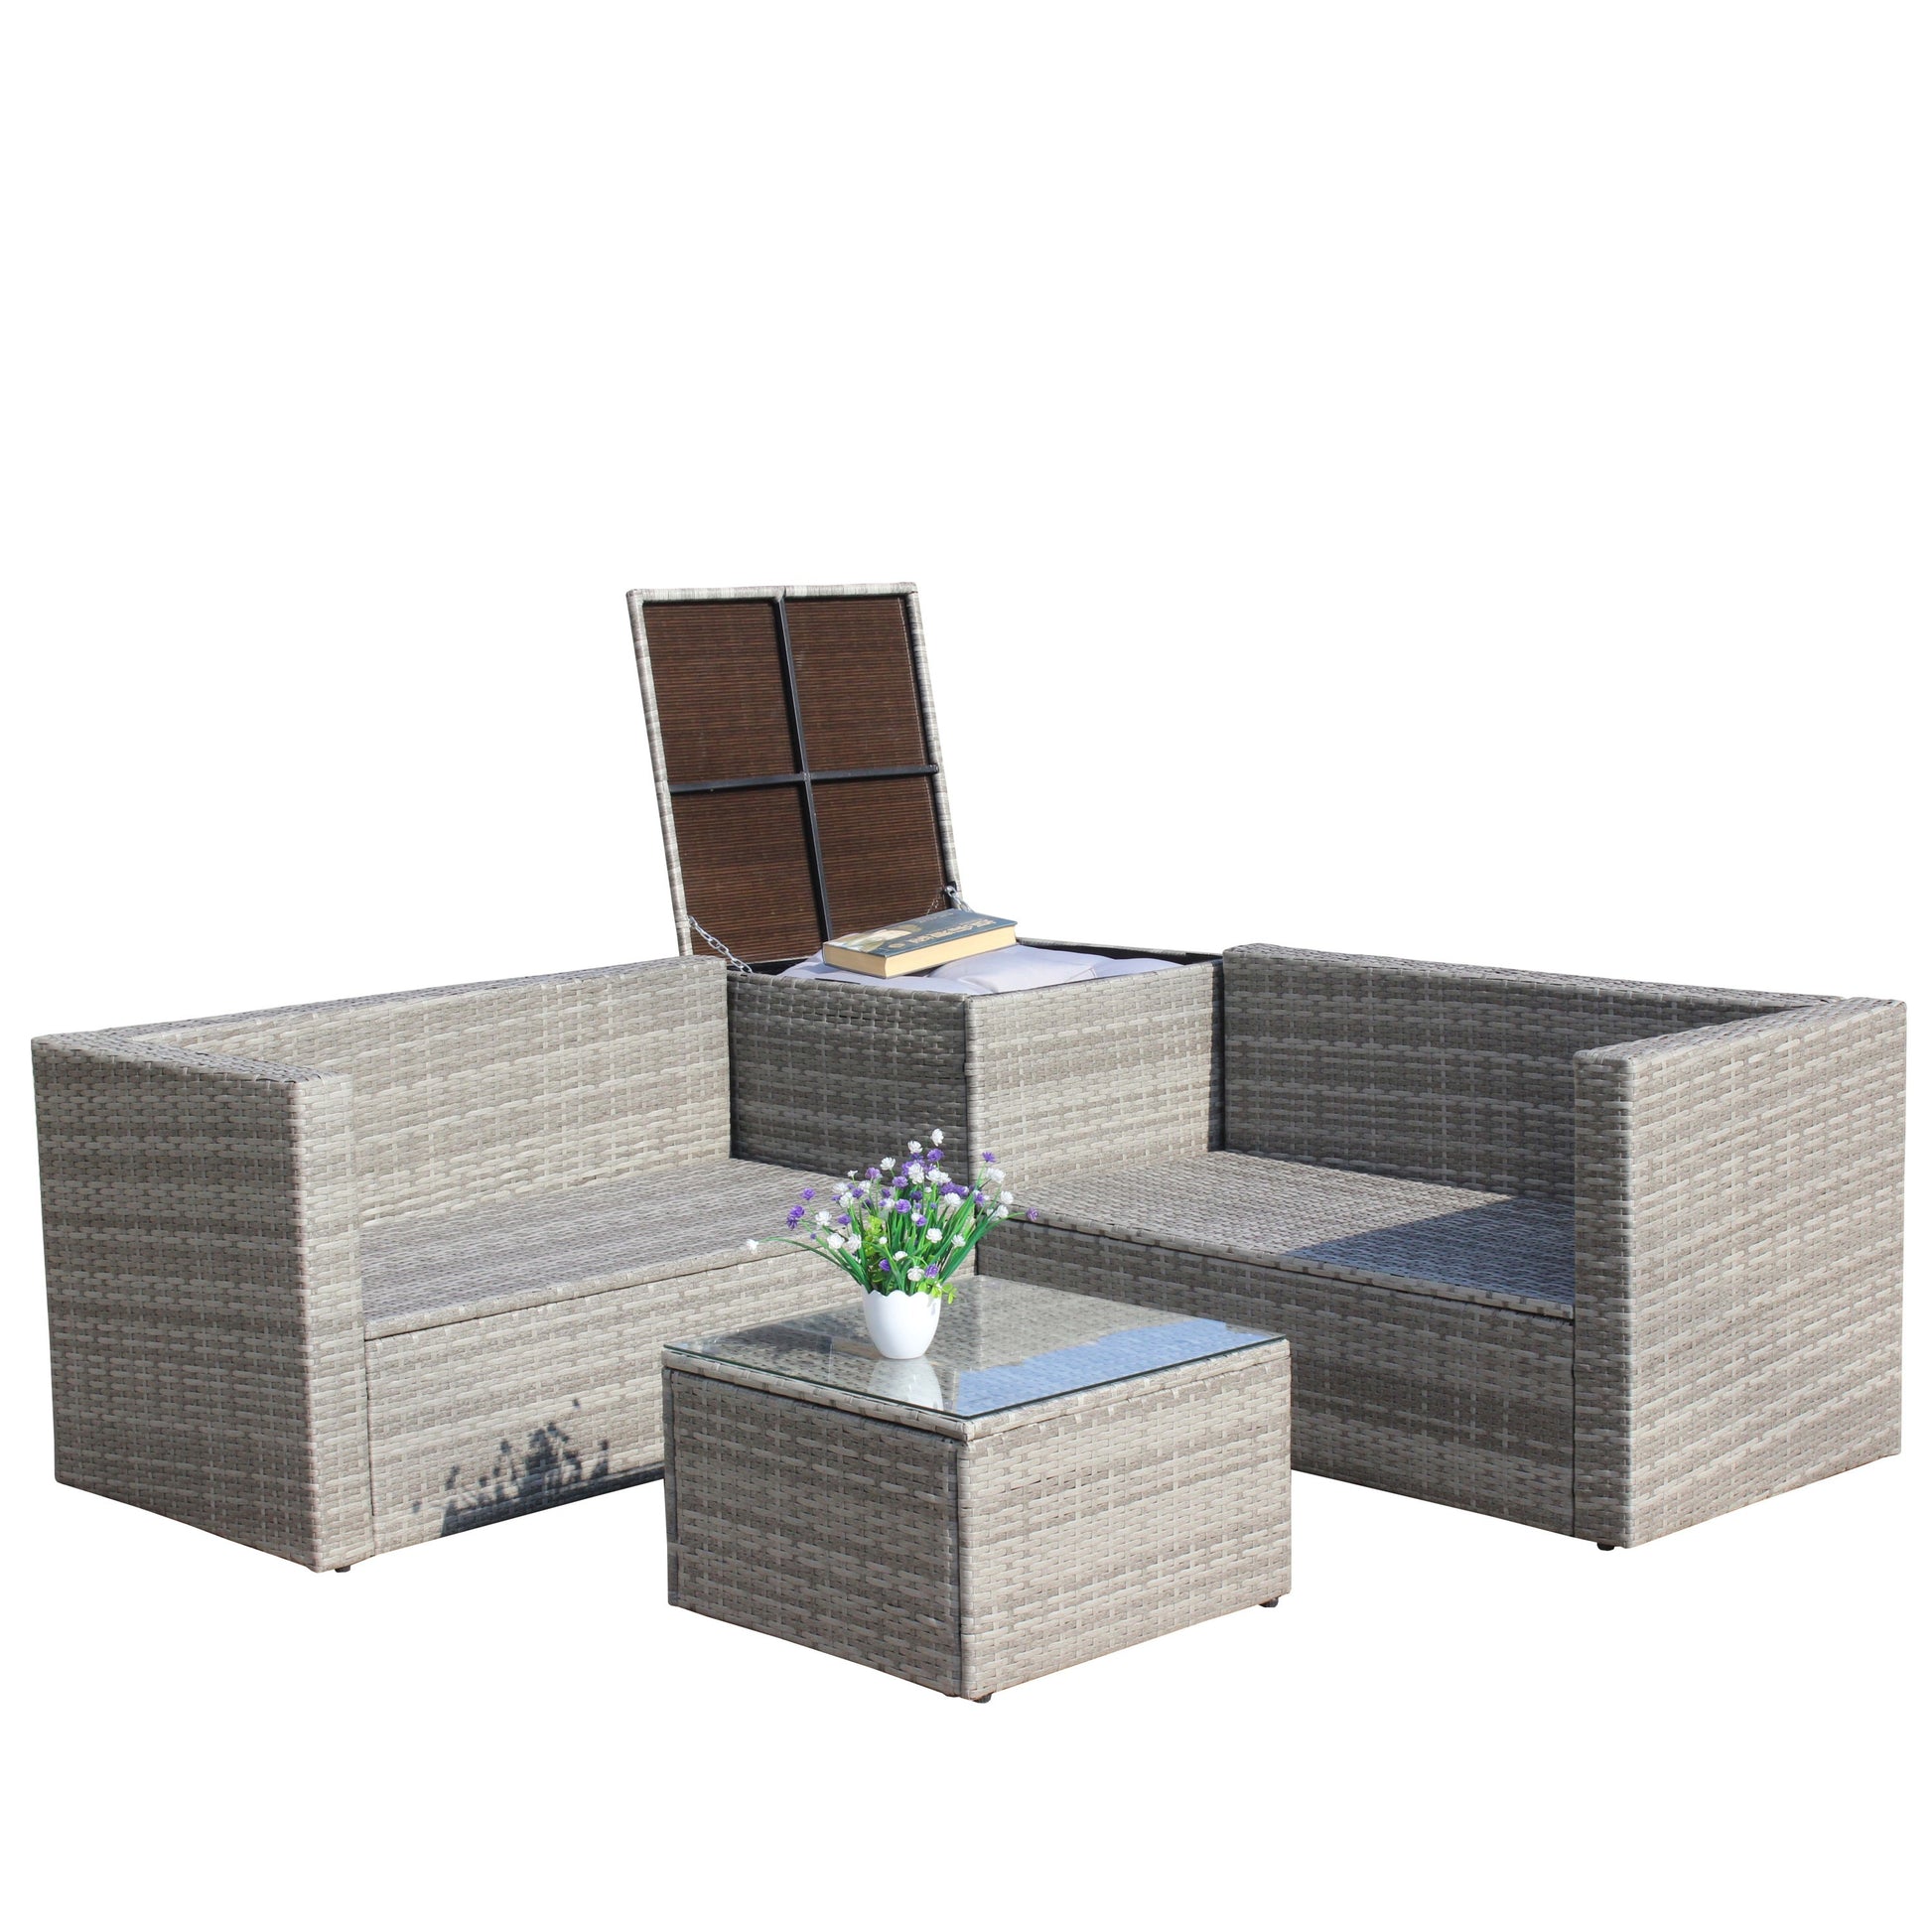 4 Piece Patio Sectional Outdoor Furniture with Storage Box